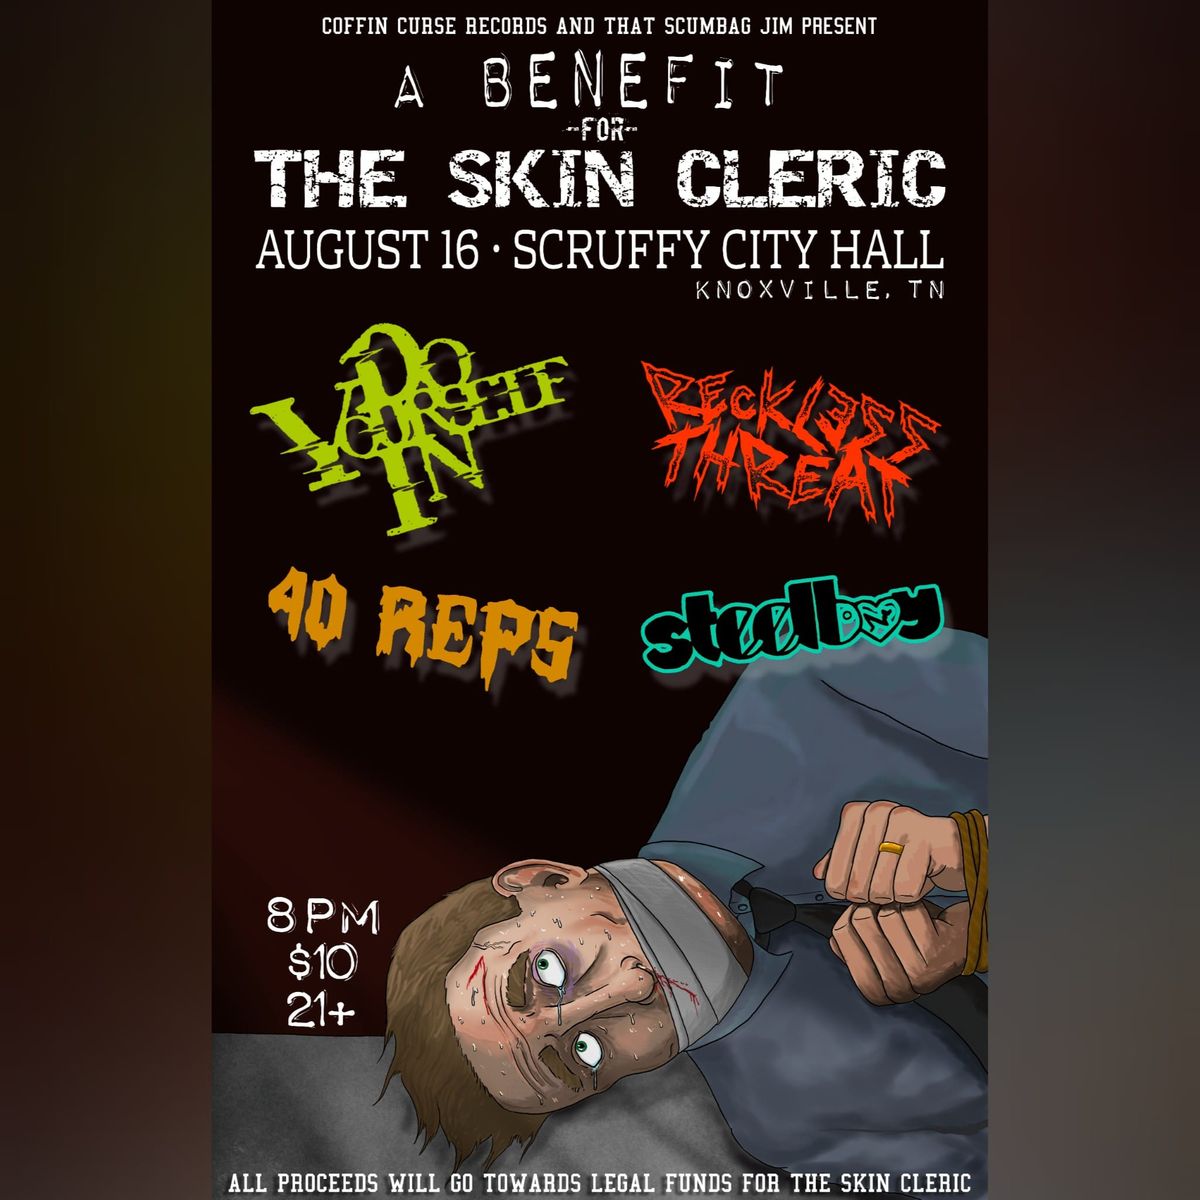 A Benefit for The Skin Cleric